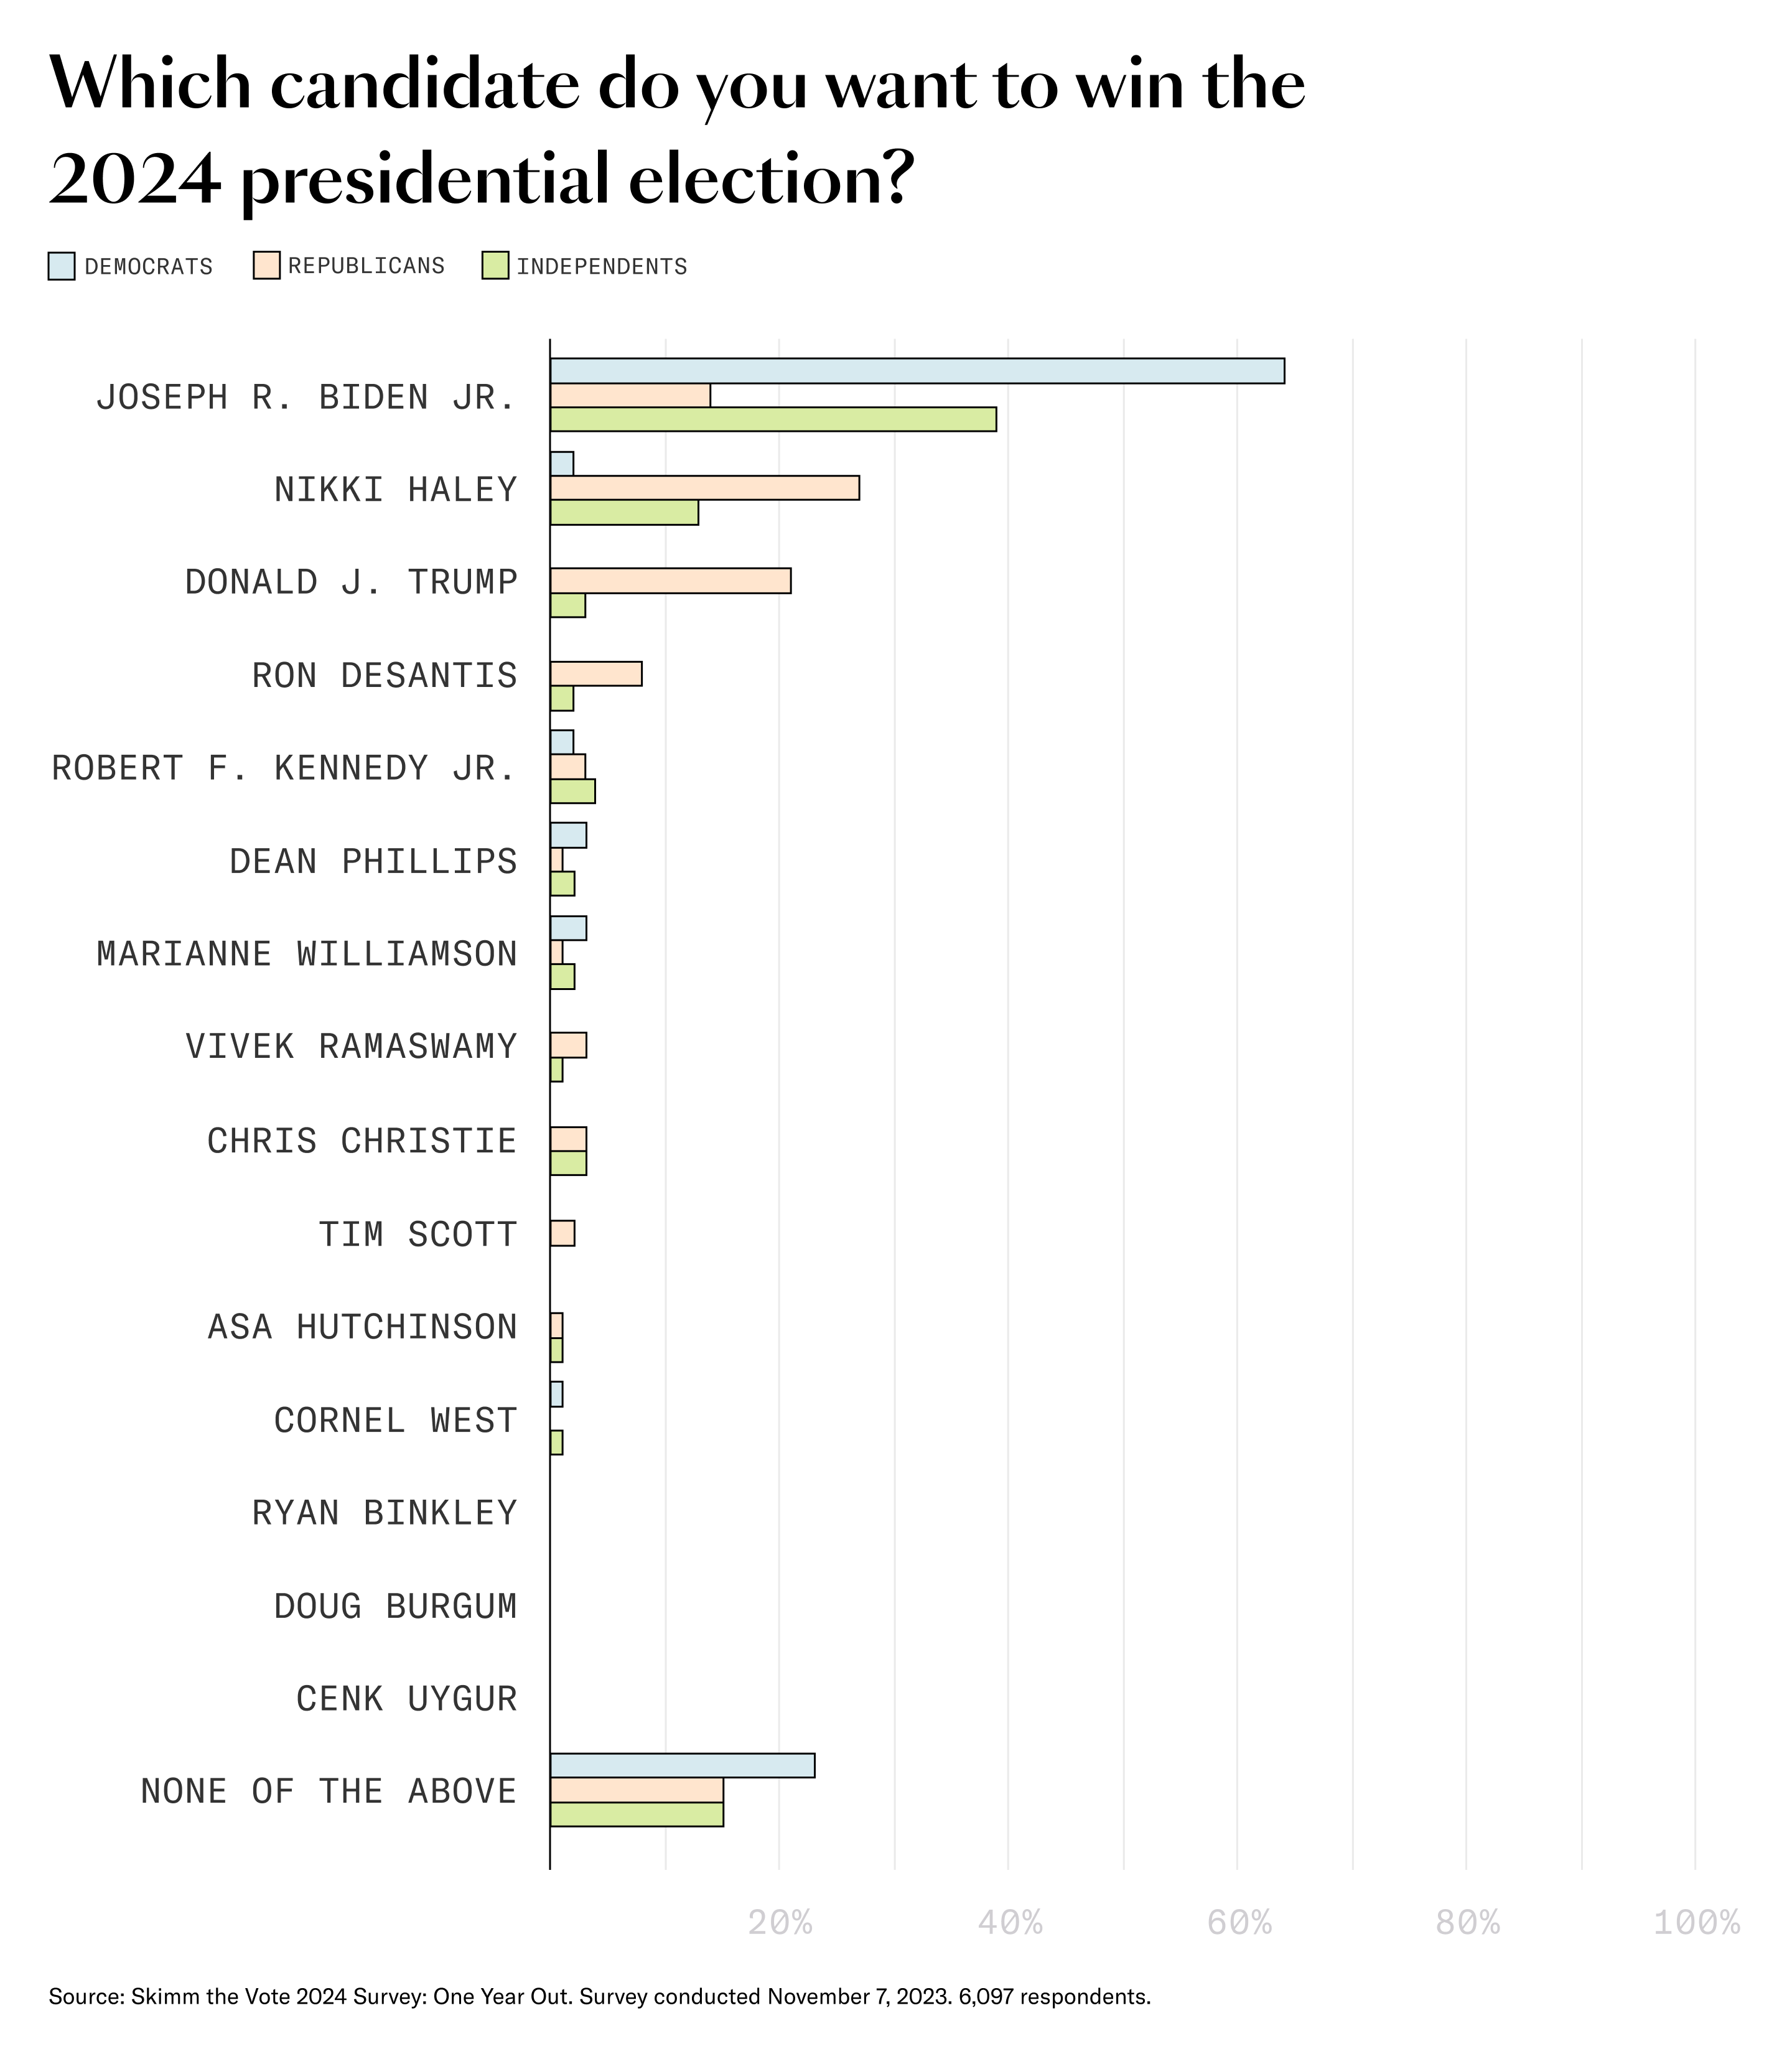 Skimm'rs want President Joe Biden to be reelected in the 2024 election.